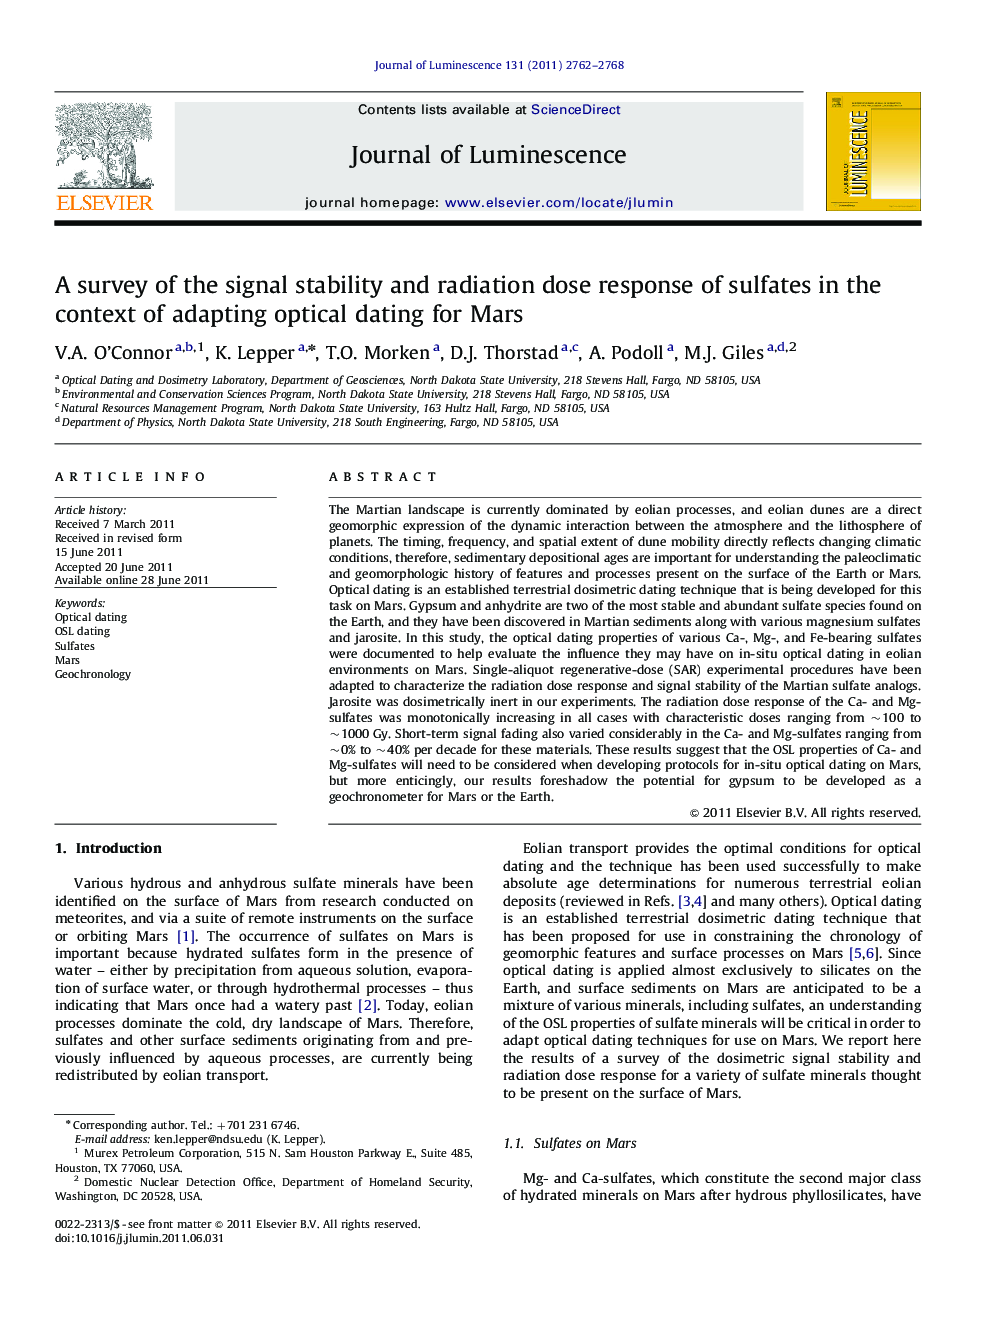 A survey of the signal stability and radiation dose response of sulfates in the context of adapting optical dating for Mars